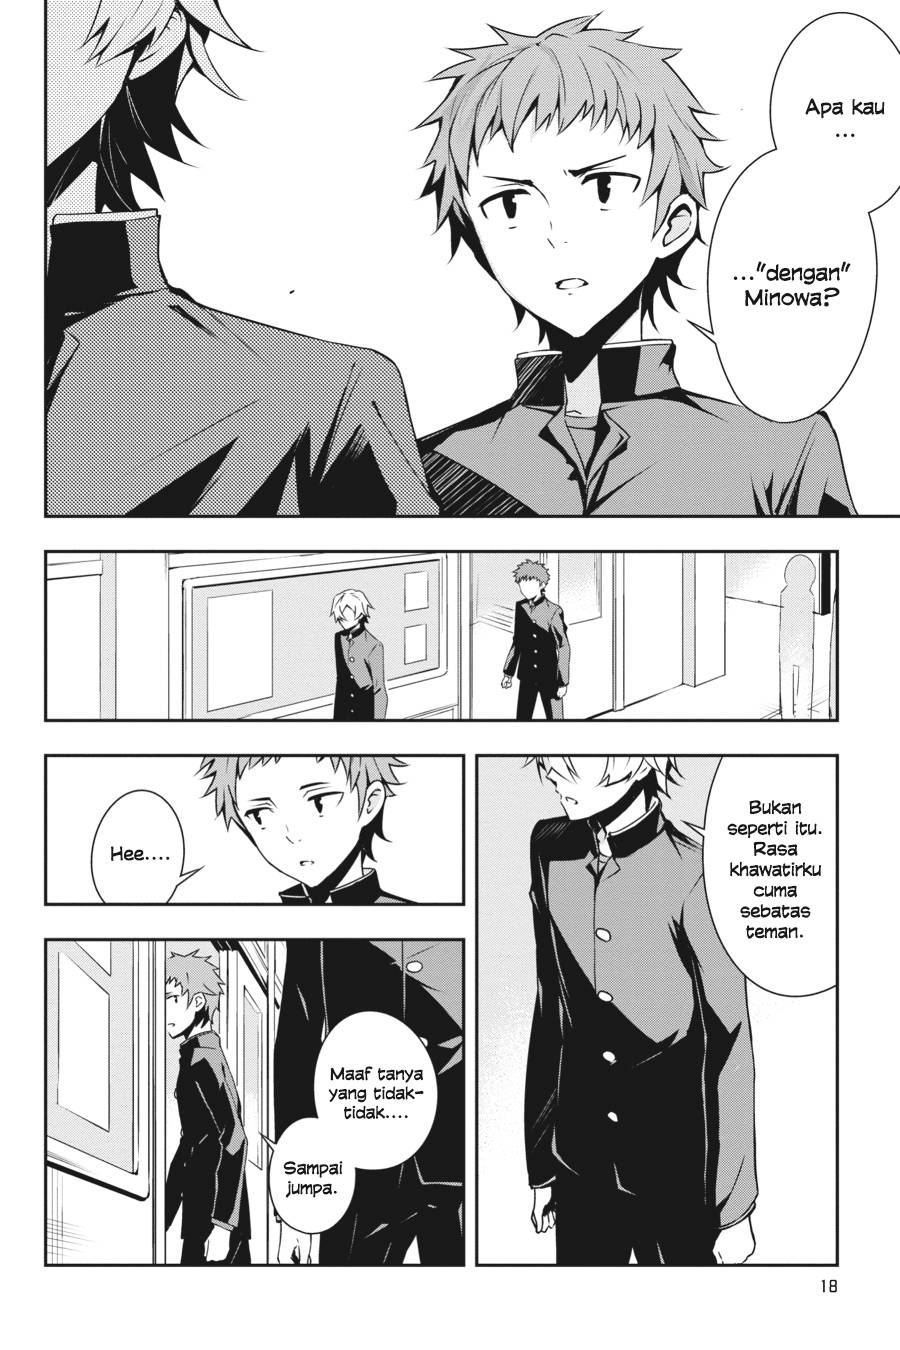 The Isolator: Realization of Absolute Solitude Chapter 07